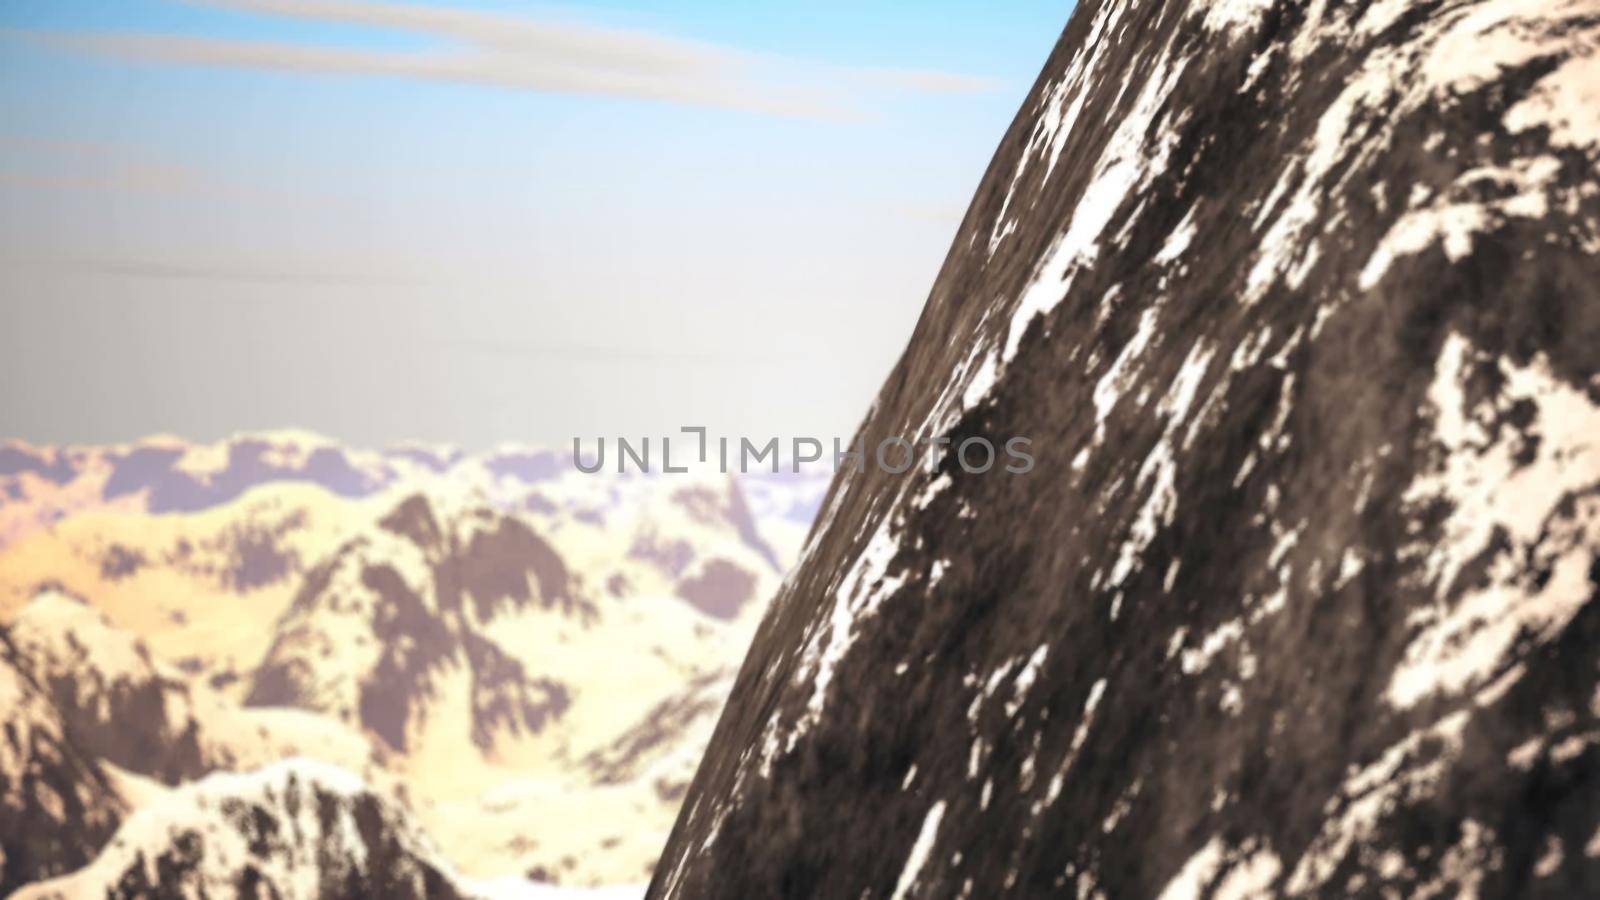 Fflying over mountains. aerial view 3D rendering by designprojects